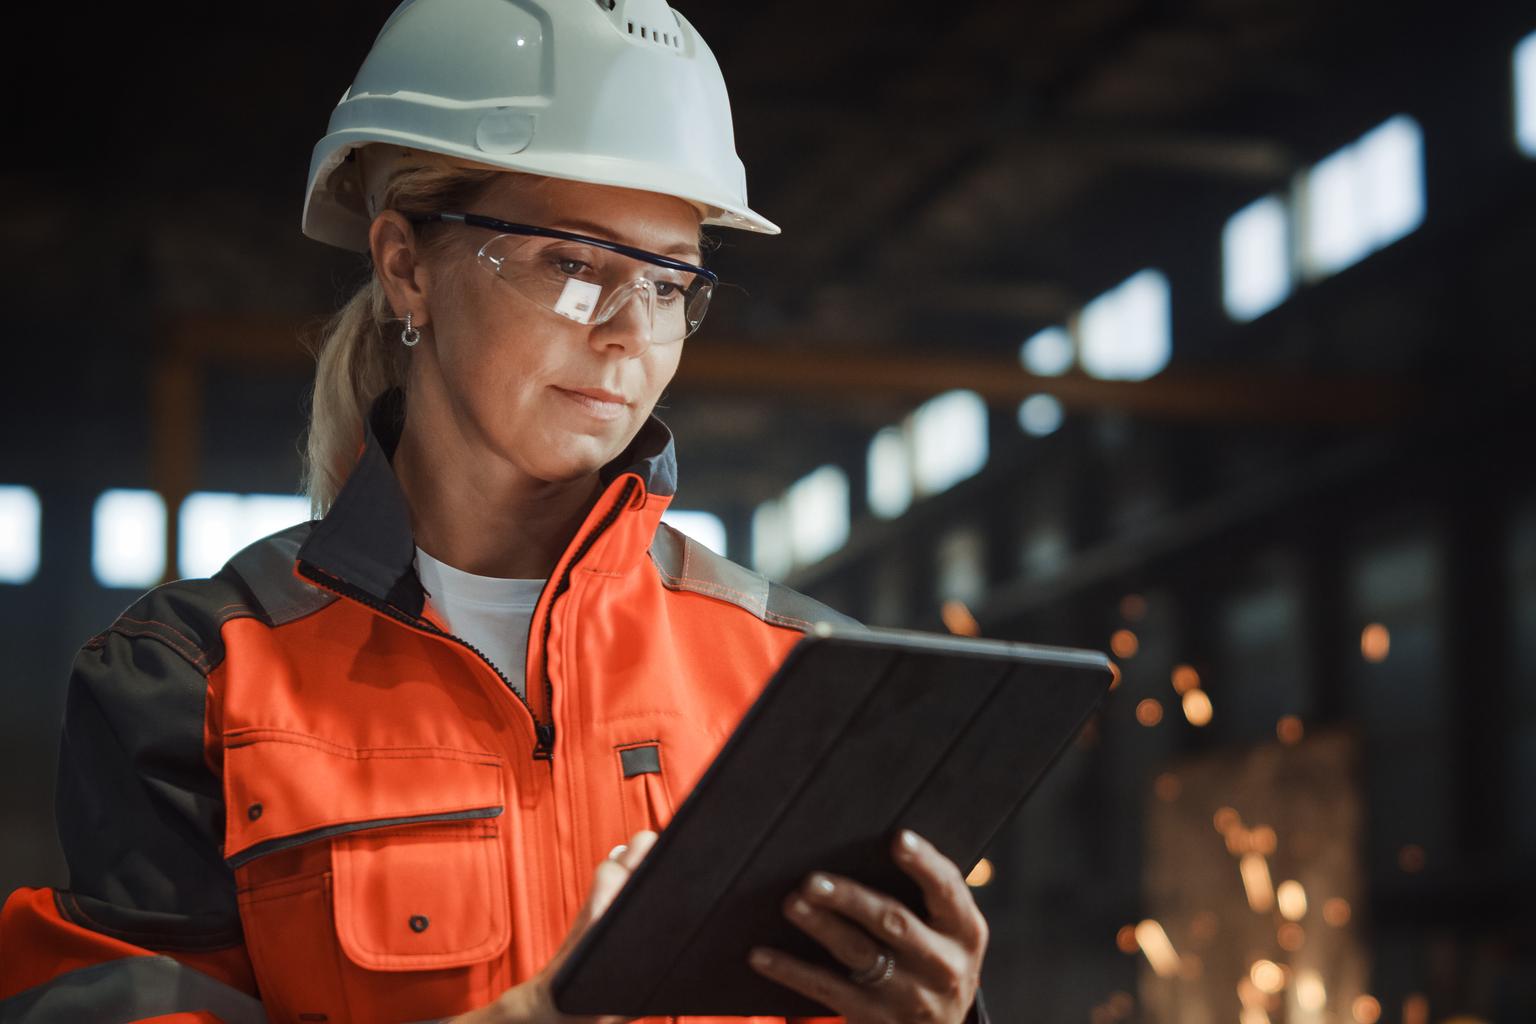 Professional Heavy Industry Engineer Worker Wearing Safety Uniform and Hard Hat Uses Tablet Computer. Serious Successful Female Industrial Specialist Standing in a Metal Manufacture Warehouse.